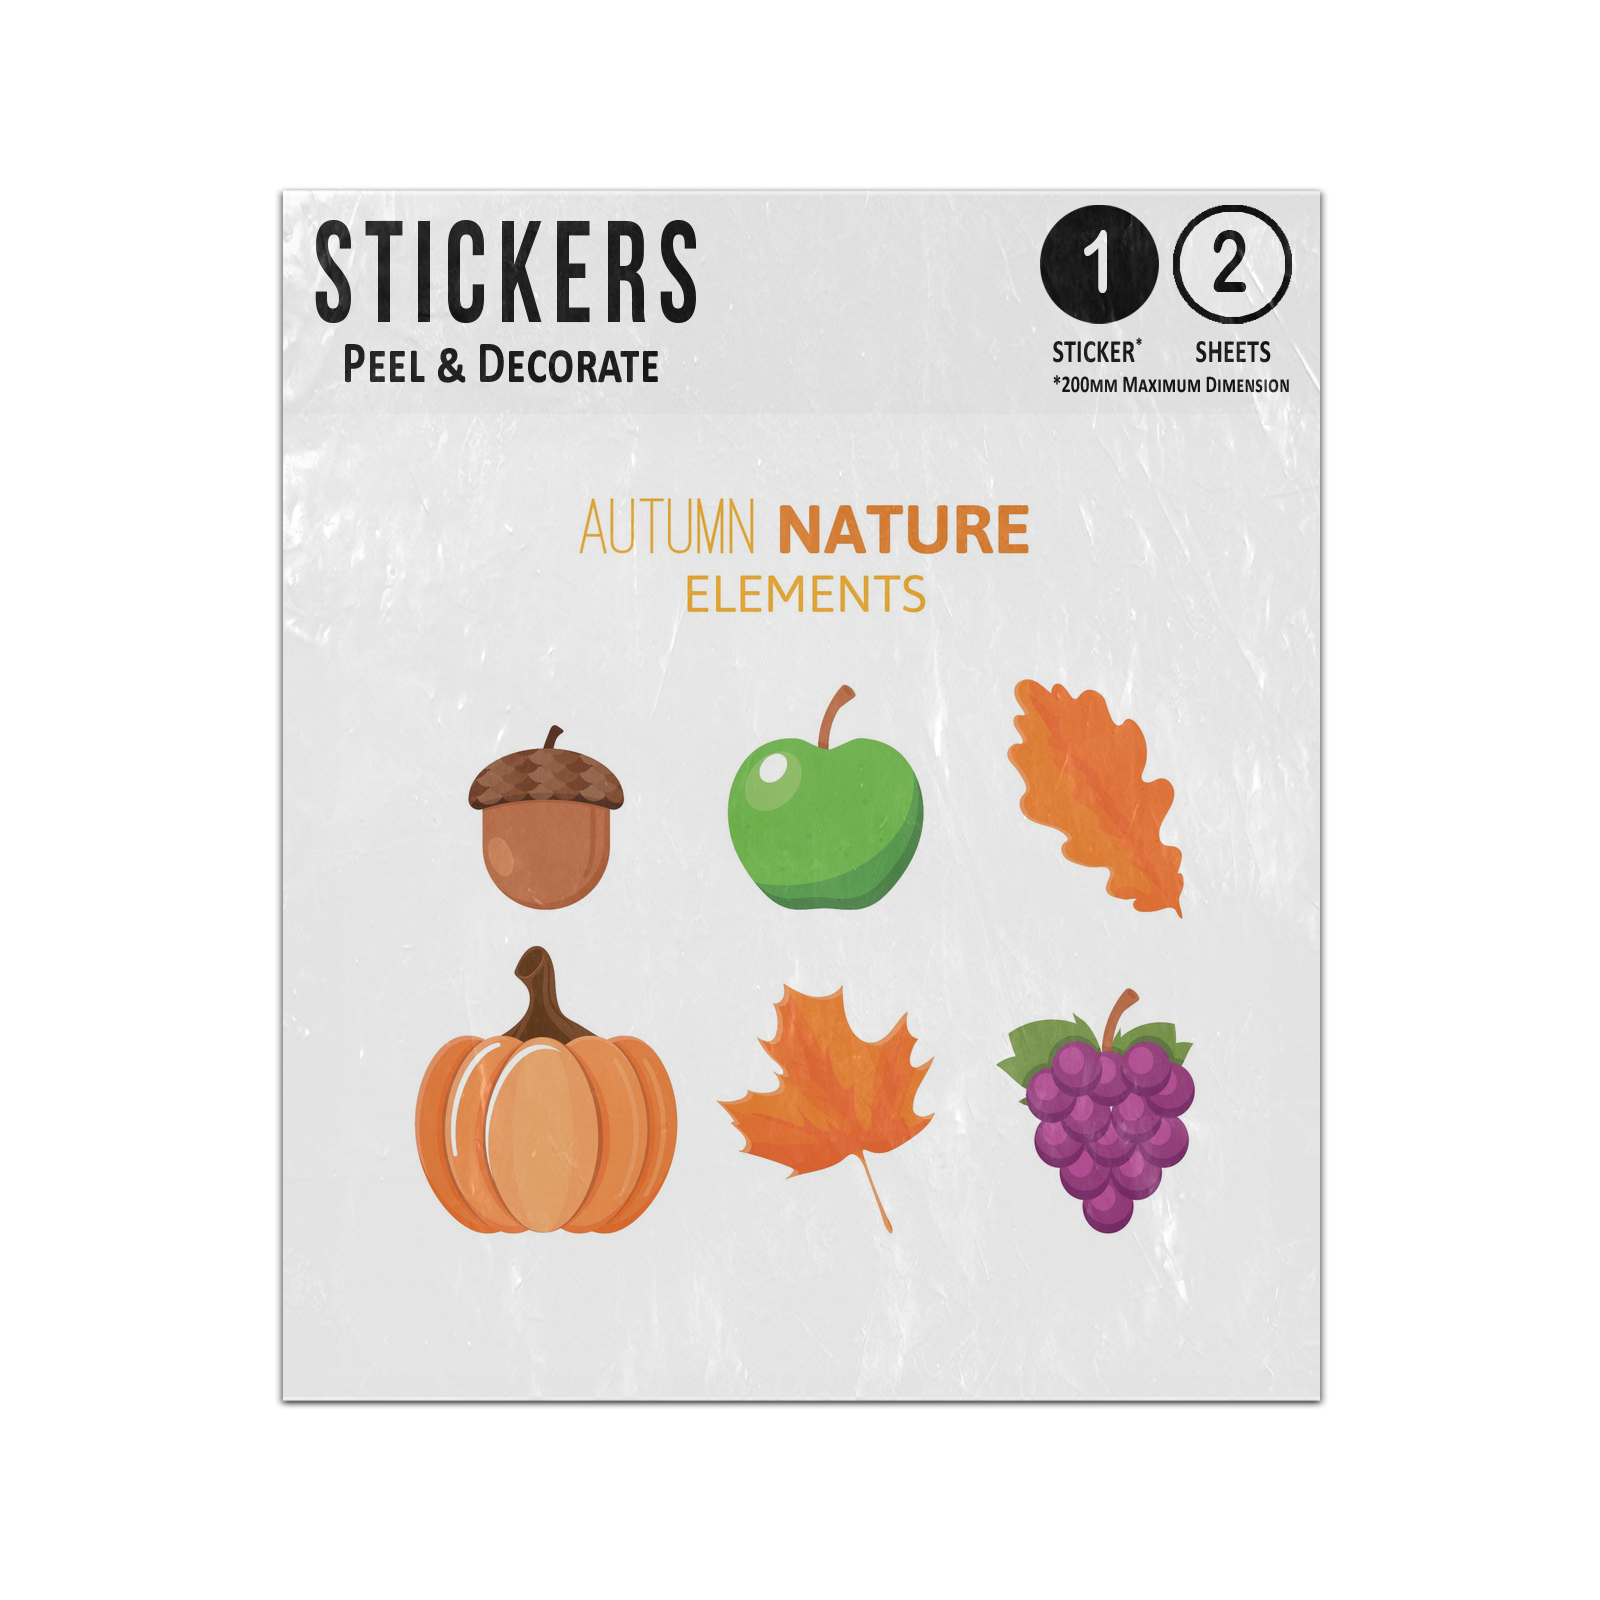 Picture of Autumn Elements Acorn Apple Oak Leaf Pumpkin Sycamore Grapes Sticker Sheets Twin Pack